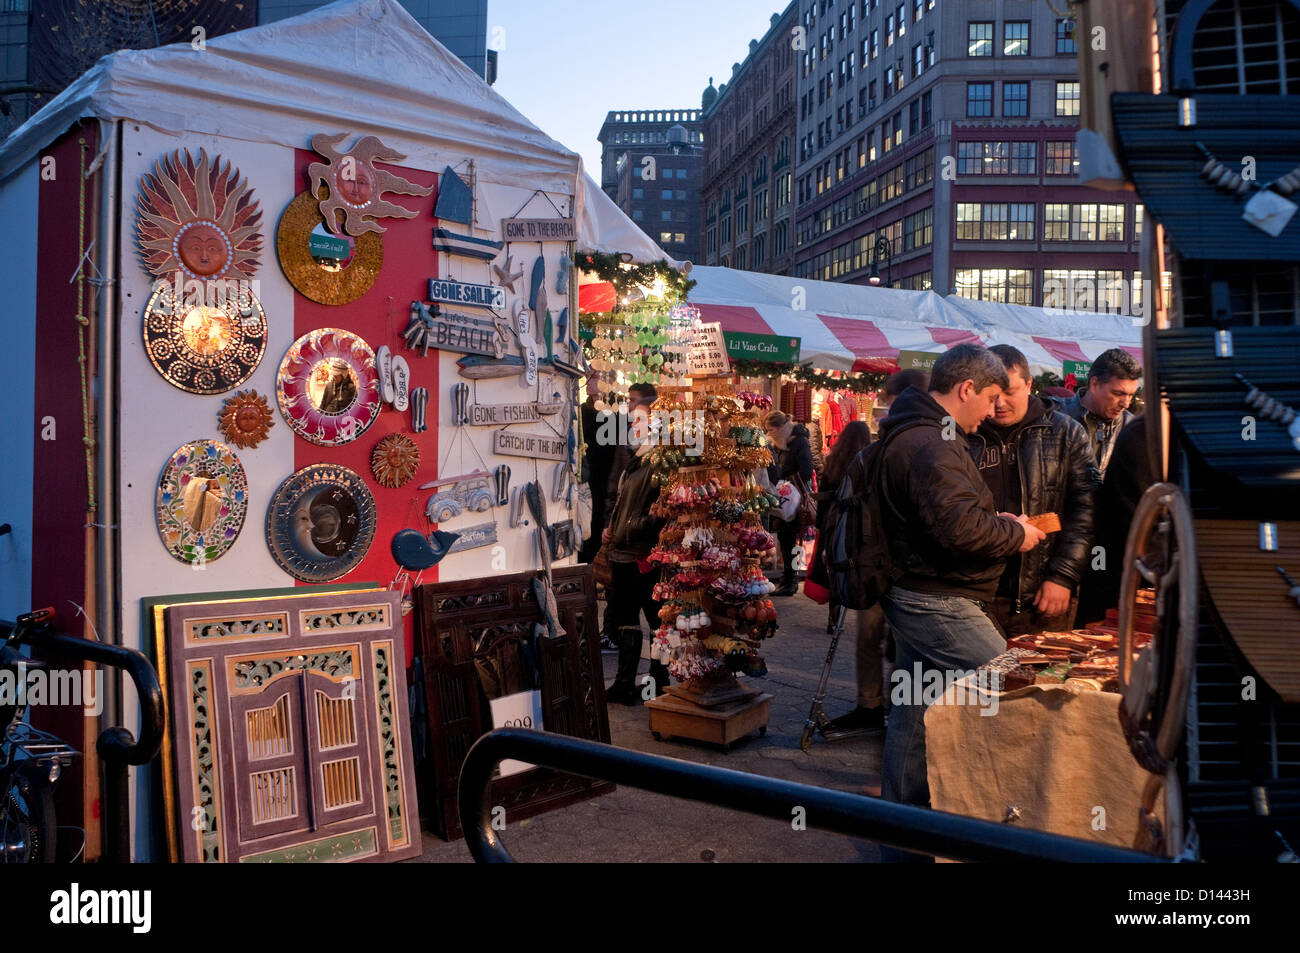 New York, NY - 13 December 2011 - Holiday shoppers at the Union Square Christmas Vendors shops. ©Stacy Walsh Rosenstock/Alamy Stock Photo